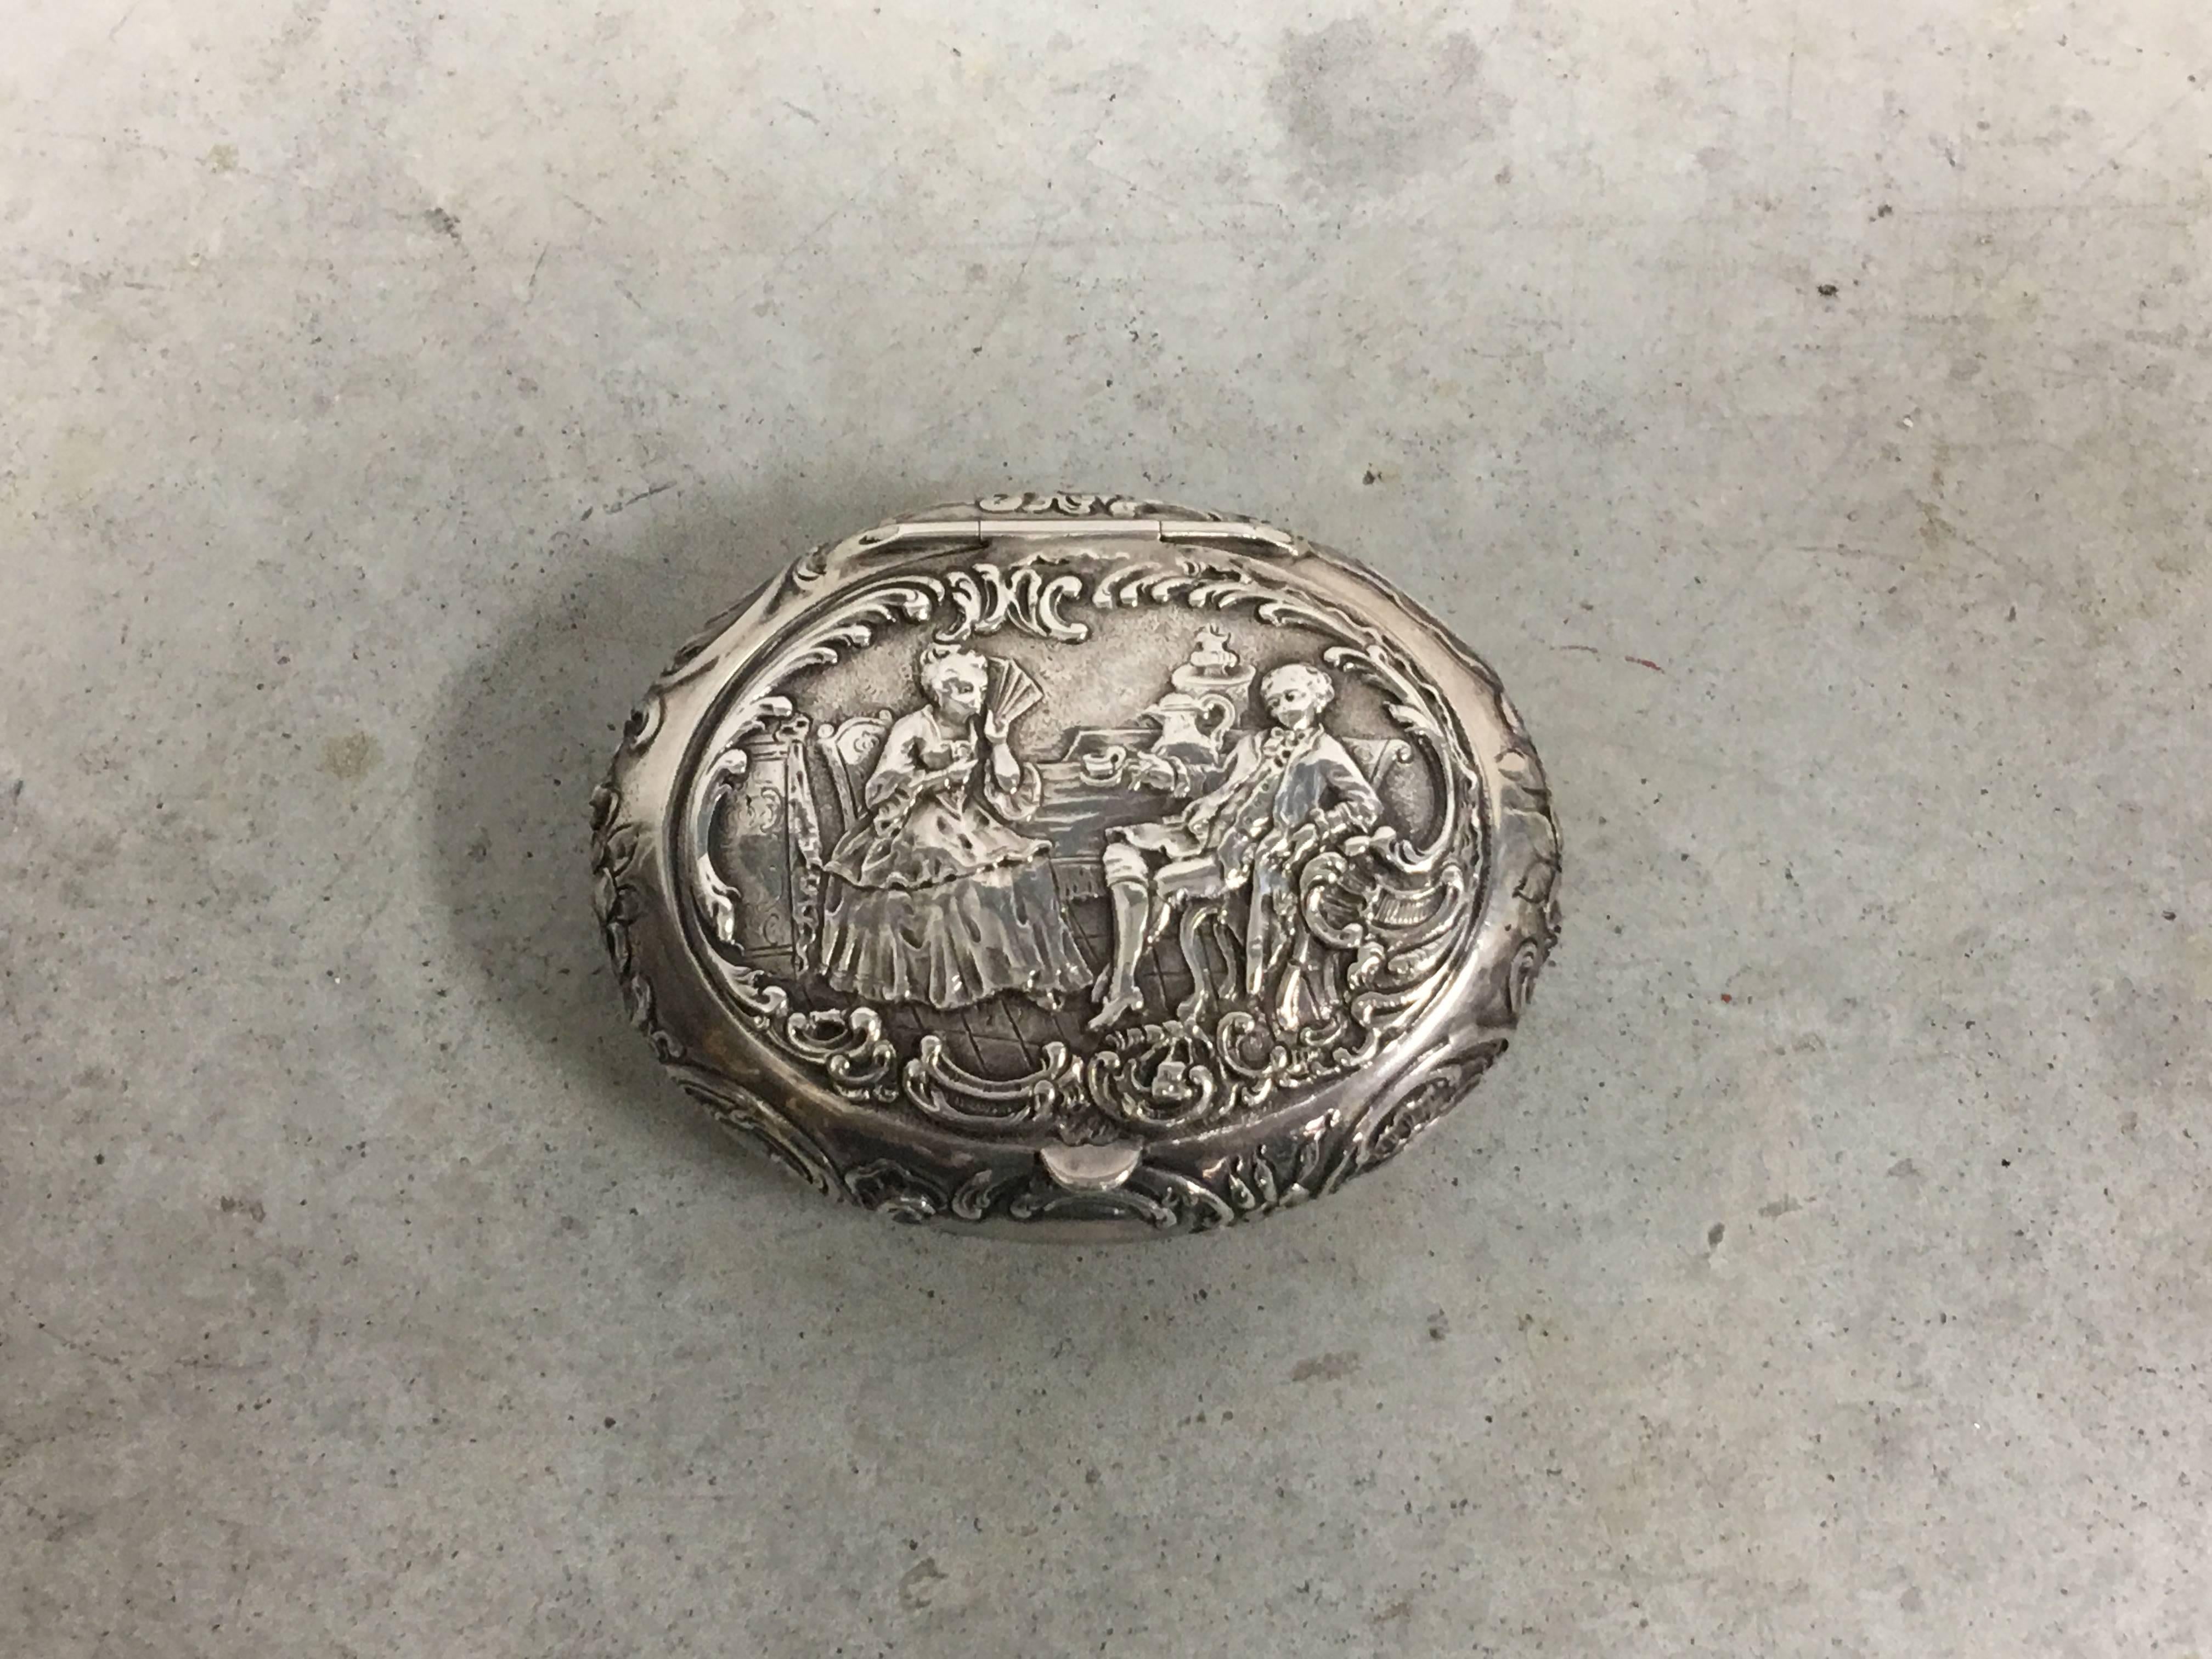 Offered is a stunning, 19th century English sterling silver oval snuff box. Lovely, traditional European relief-effect design all-over. The piece is hinged along the upper backside, allowing the top to pivot open. Marked on underside.